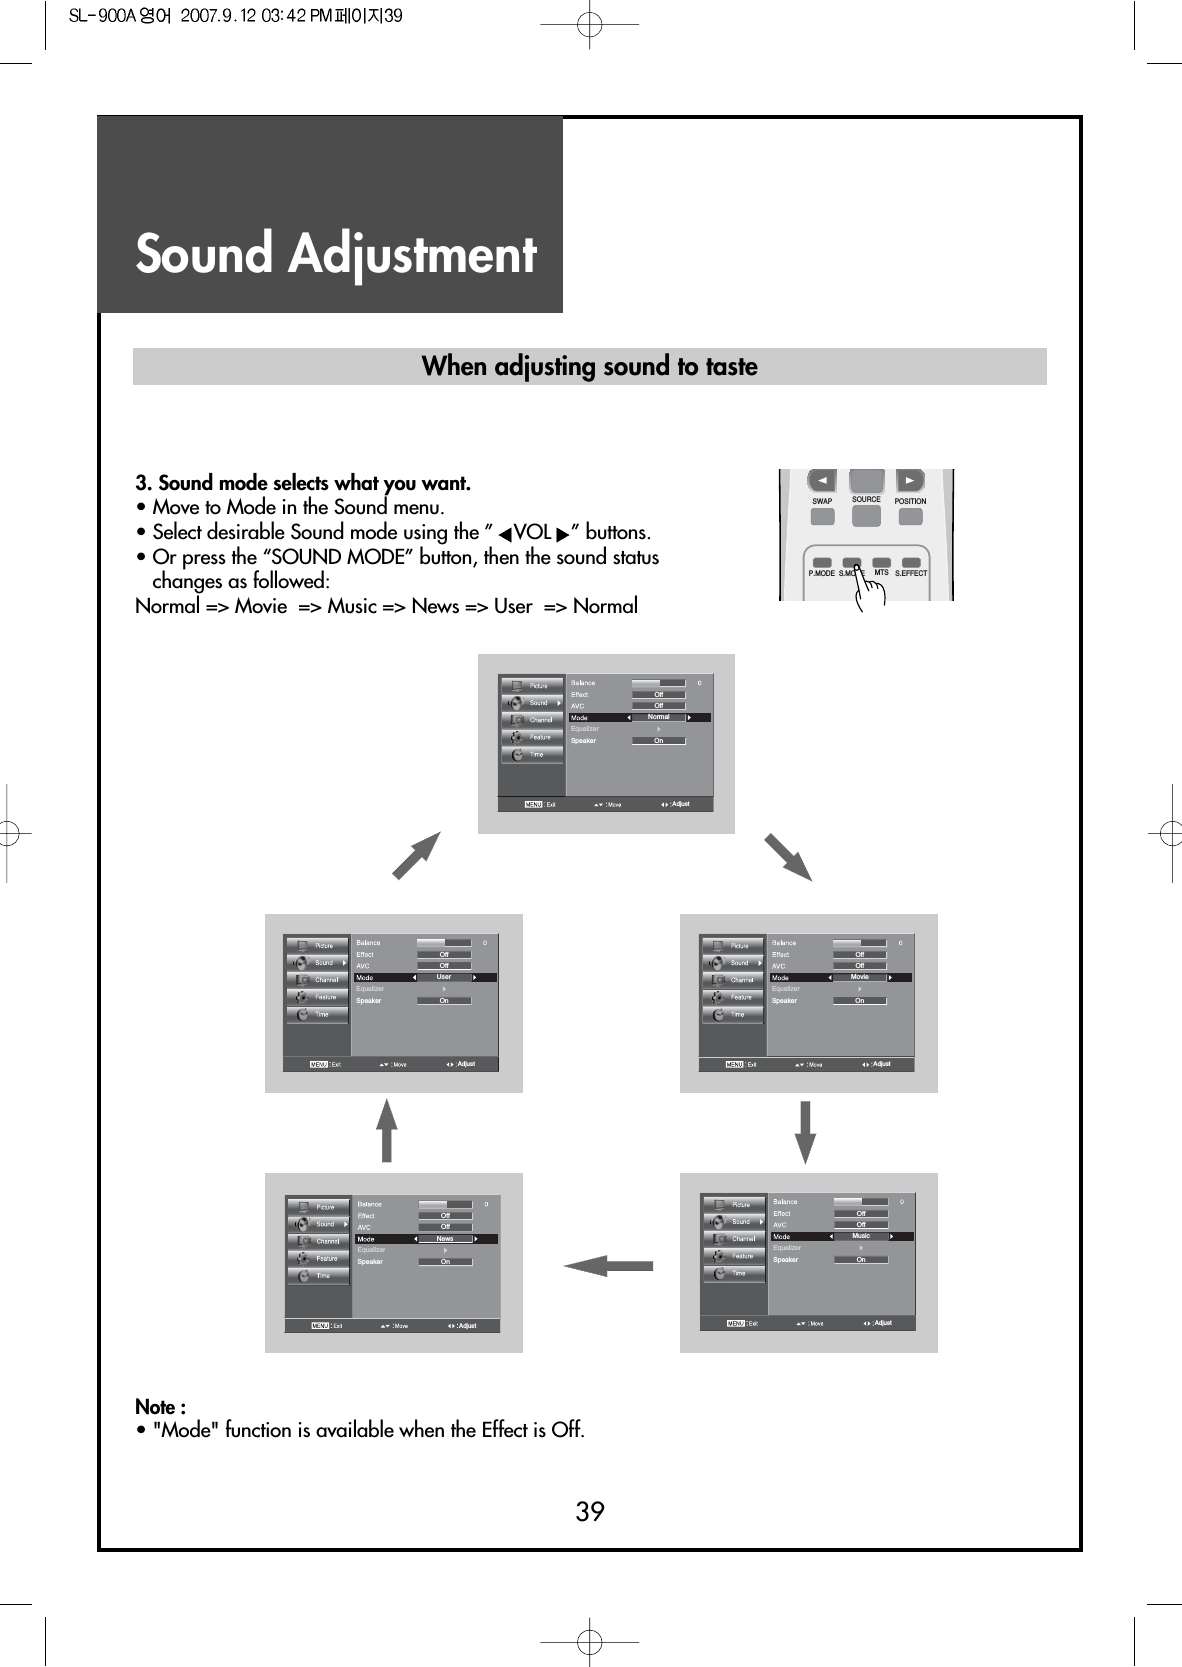 Sound Adjustment39AdjustEqualizerOnOffUserSpeakerOffAdjustEqualizerOnOffNewsSpeakerOffAdjustEqualizerOnOffNormalSpeakerOffAdjustEqualizerOnOffMovieSpeakerOffAdjustEqualizerOnOffMusicSpeakerOffWhen adjusting sound to taste3. Sound mode selects what you want.• Move to Mode in the Sound menu.• Select desirable Sound mode using the ” VOL ” buttons.• Or press the “SOUND MODE” button, then the sound statuschanges as followed:Normal =&gt; Movie  =&gt; Music =&gt; News =&gt; User  =&gt; NormalNote :• &quot;Mode&quot; function is available when the Effect is Off.SWAPP.MODE S.MODE S.EFFECTMTSSOURCE POSITION